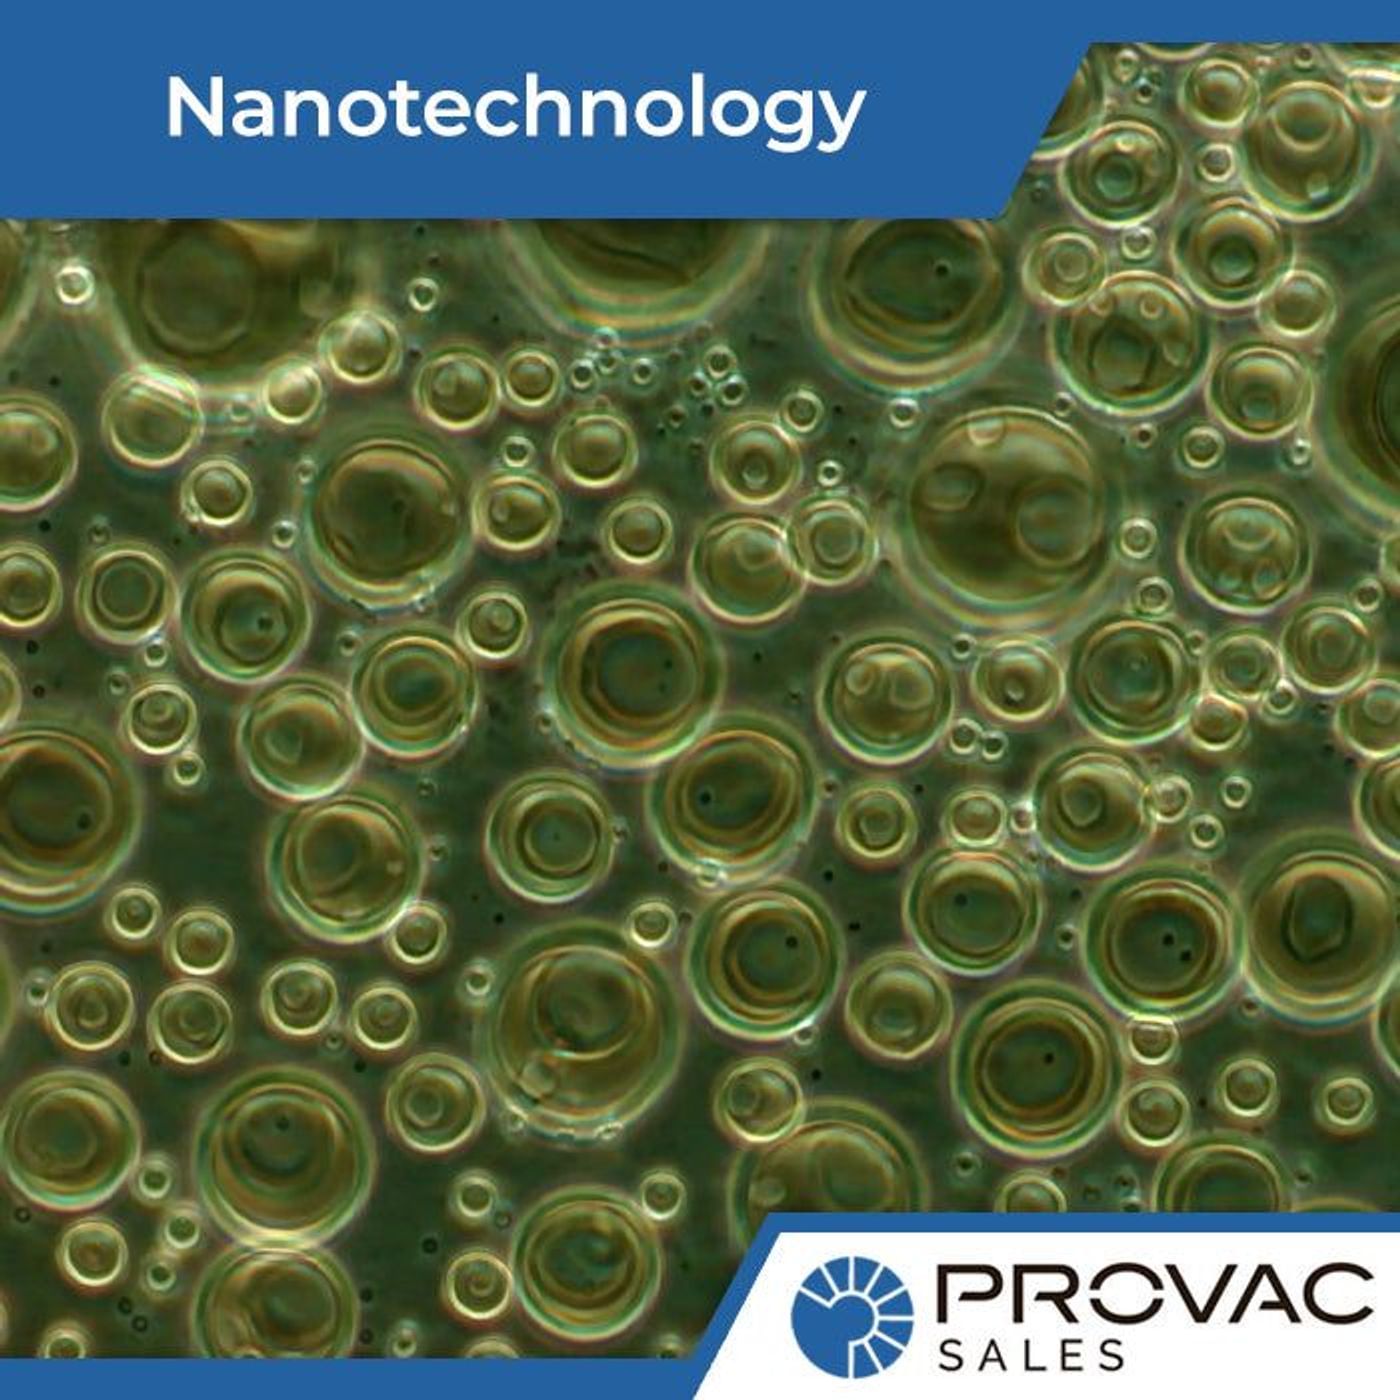 How Do Vacuum Pumps with Nanotechnology Work?